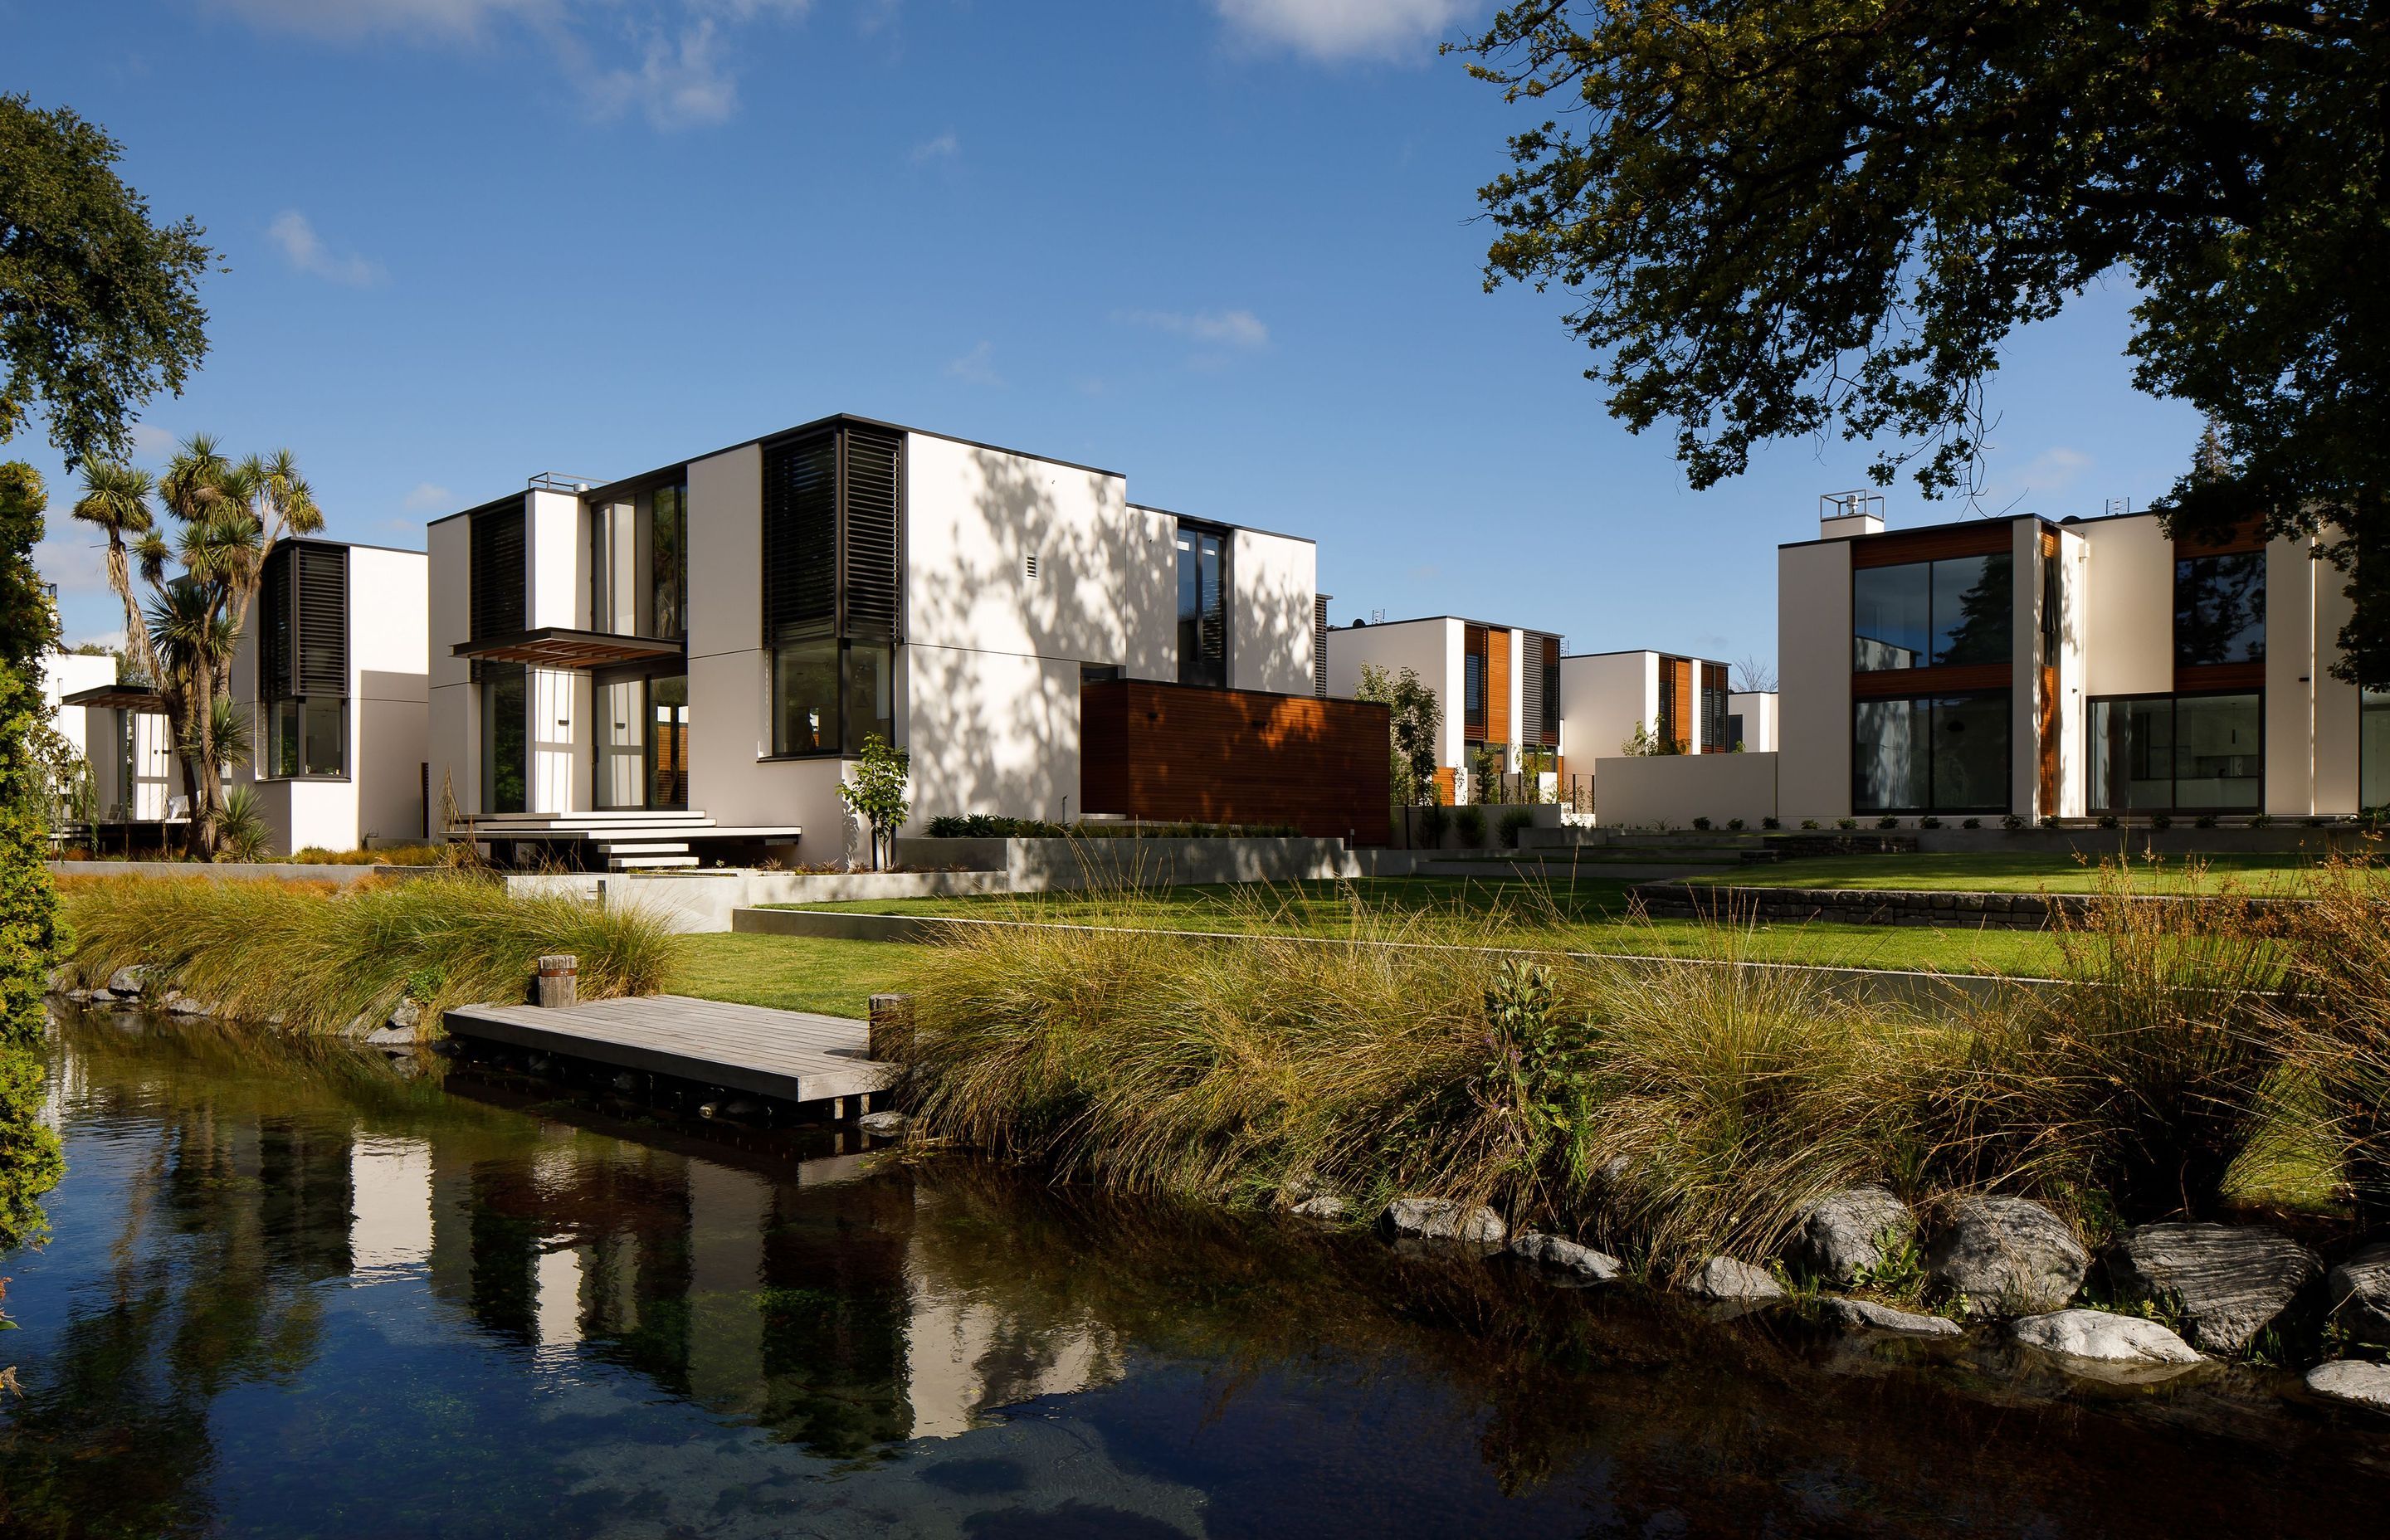 A community-minded housing development in Christchurch, Lintrathen Gardens by Sheppard &amp; Rout Architects hosts ten townhouses connected to a shared riverside green of the Avon River. Photograph by Jason Mann.